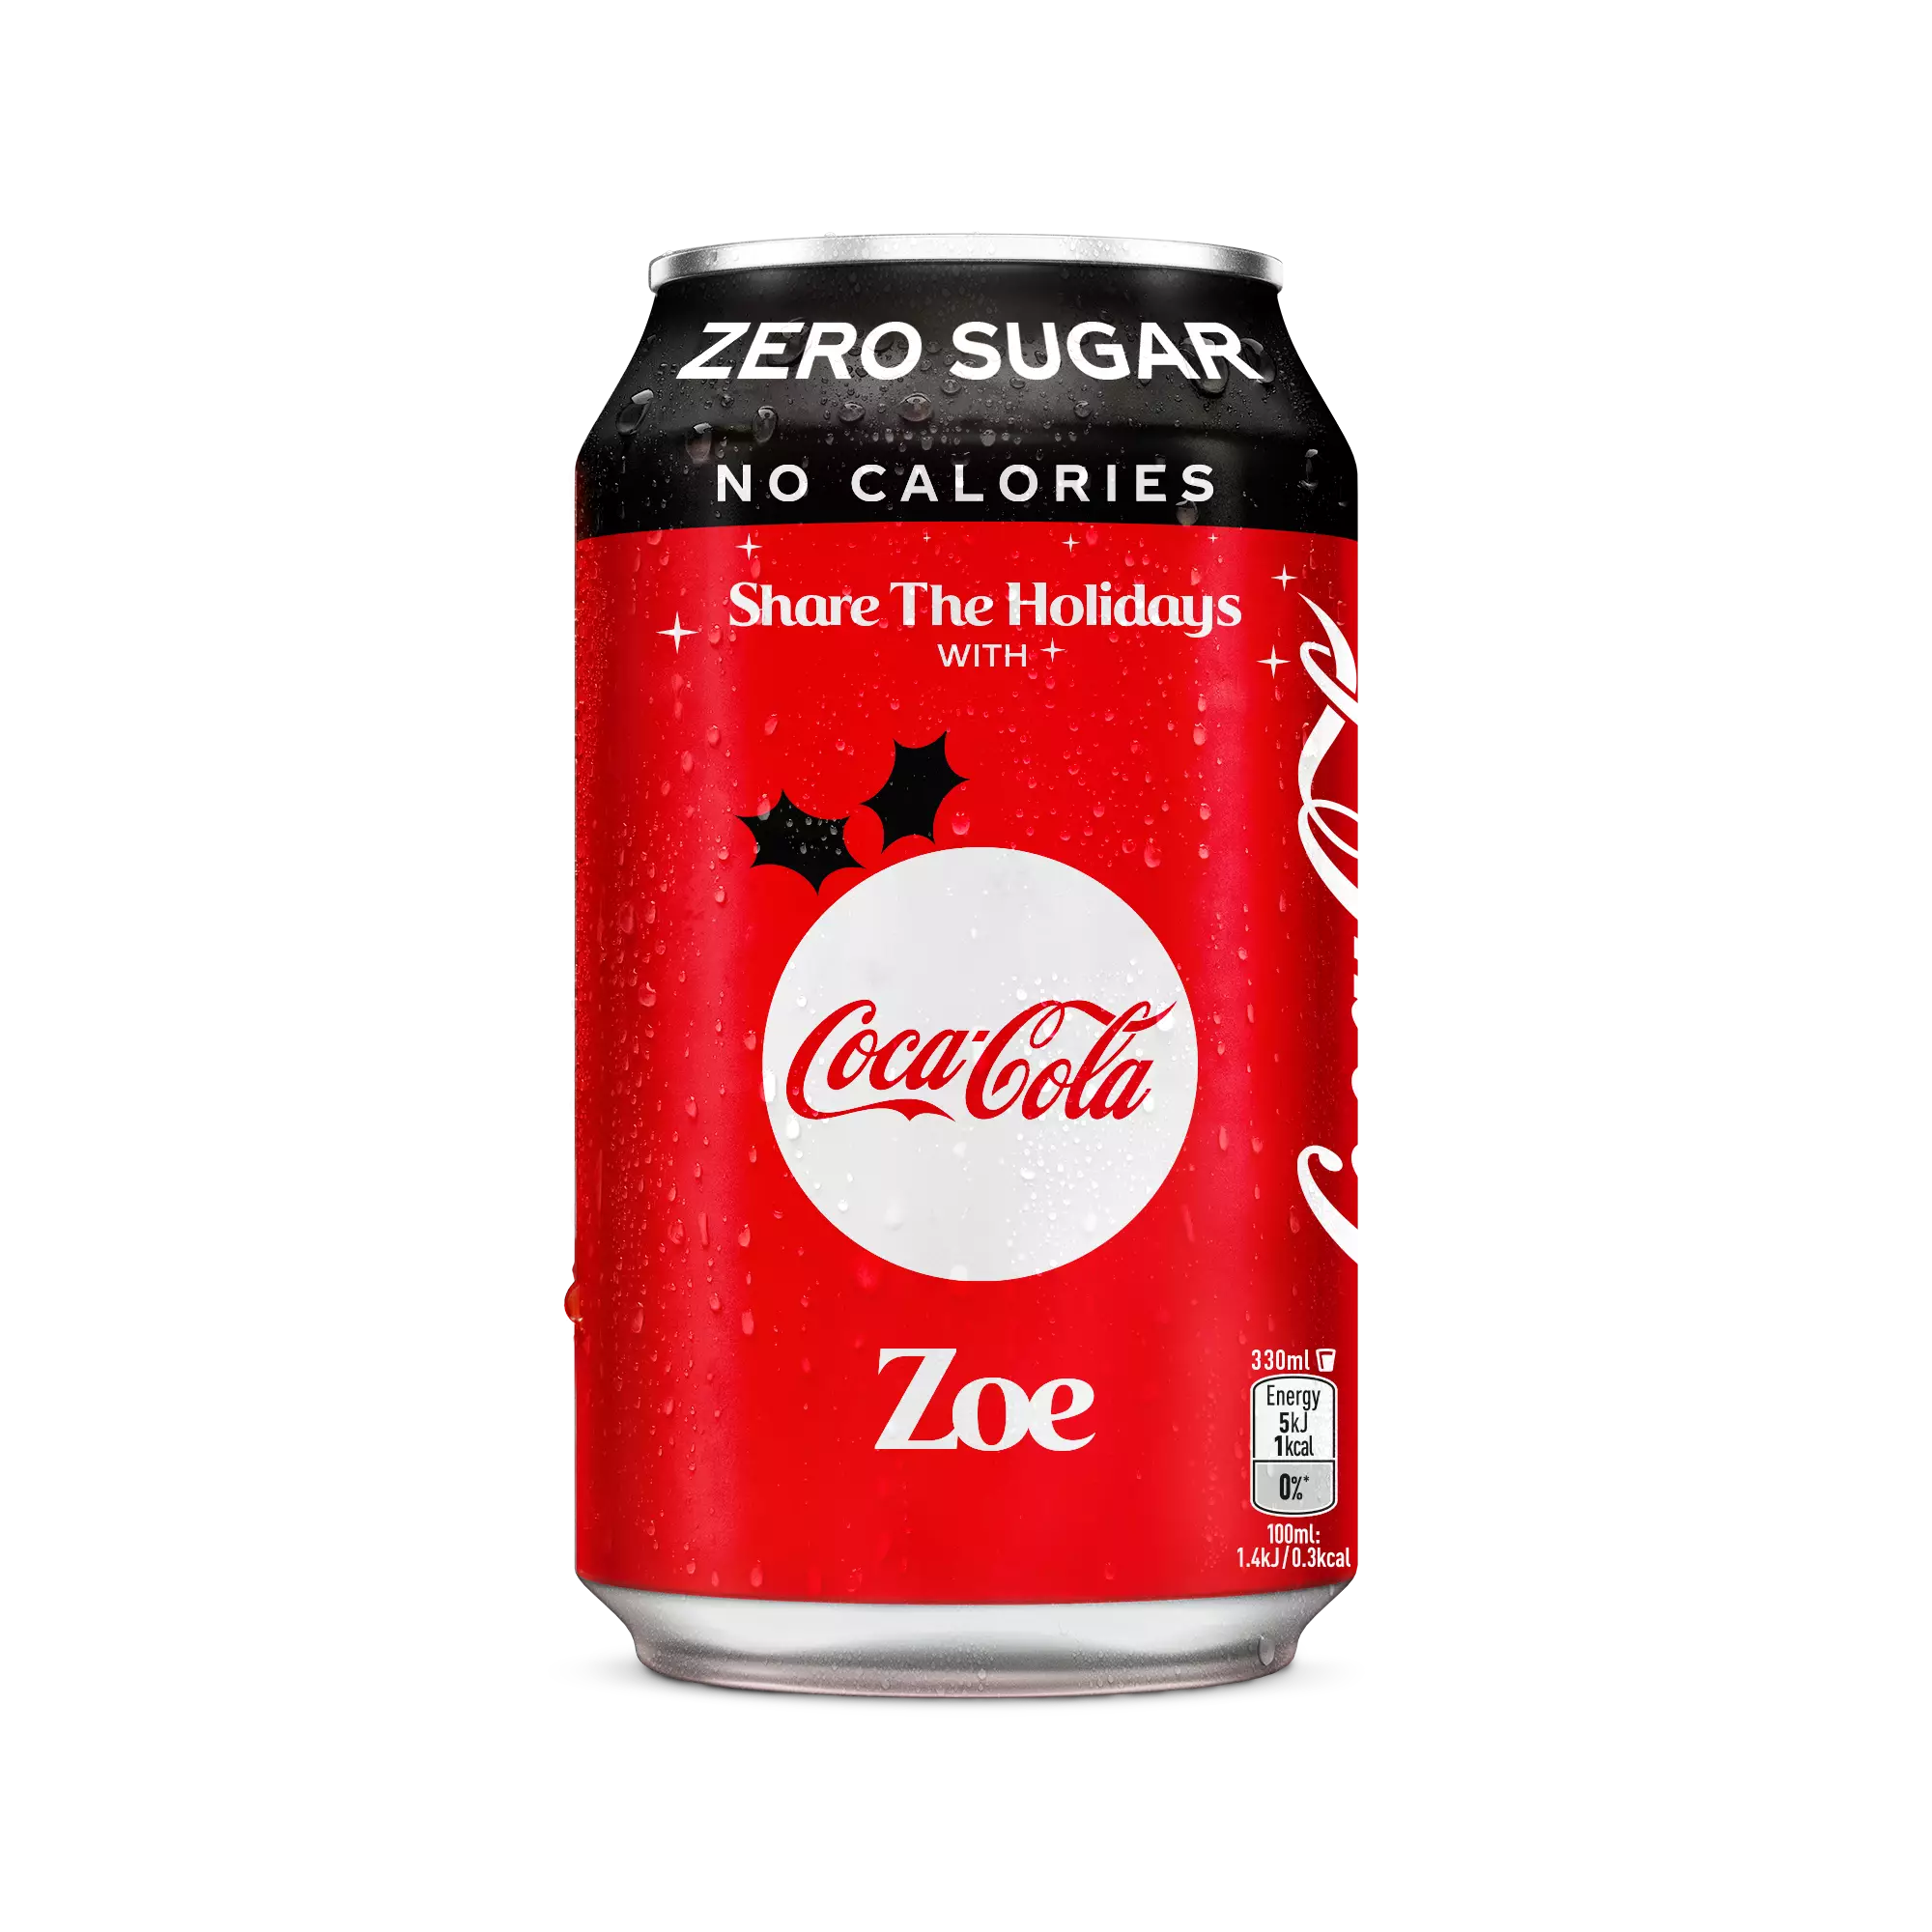 Coca-Cola will donate £2 from each personalised can ordered to homeless charity Crisis (